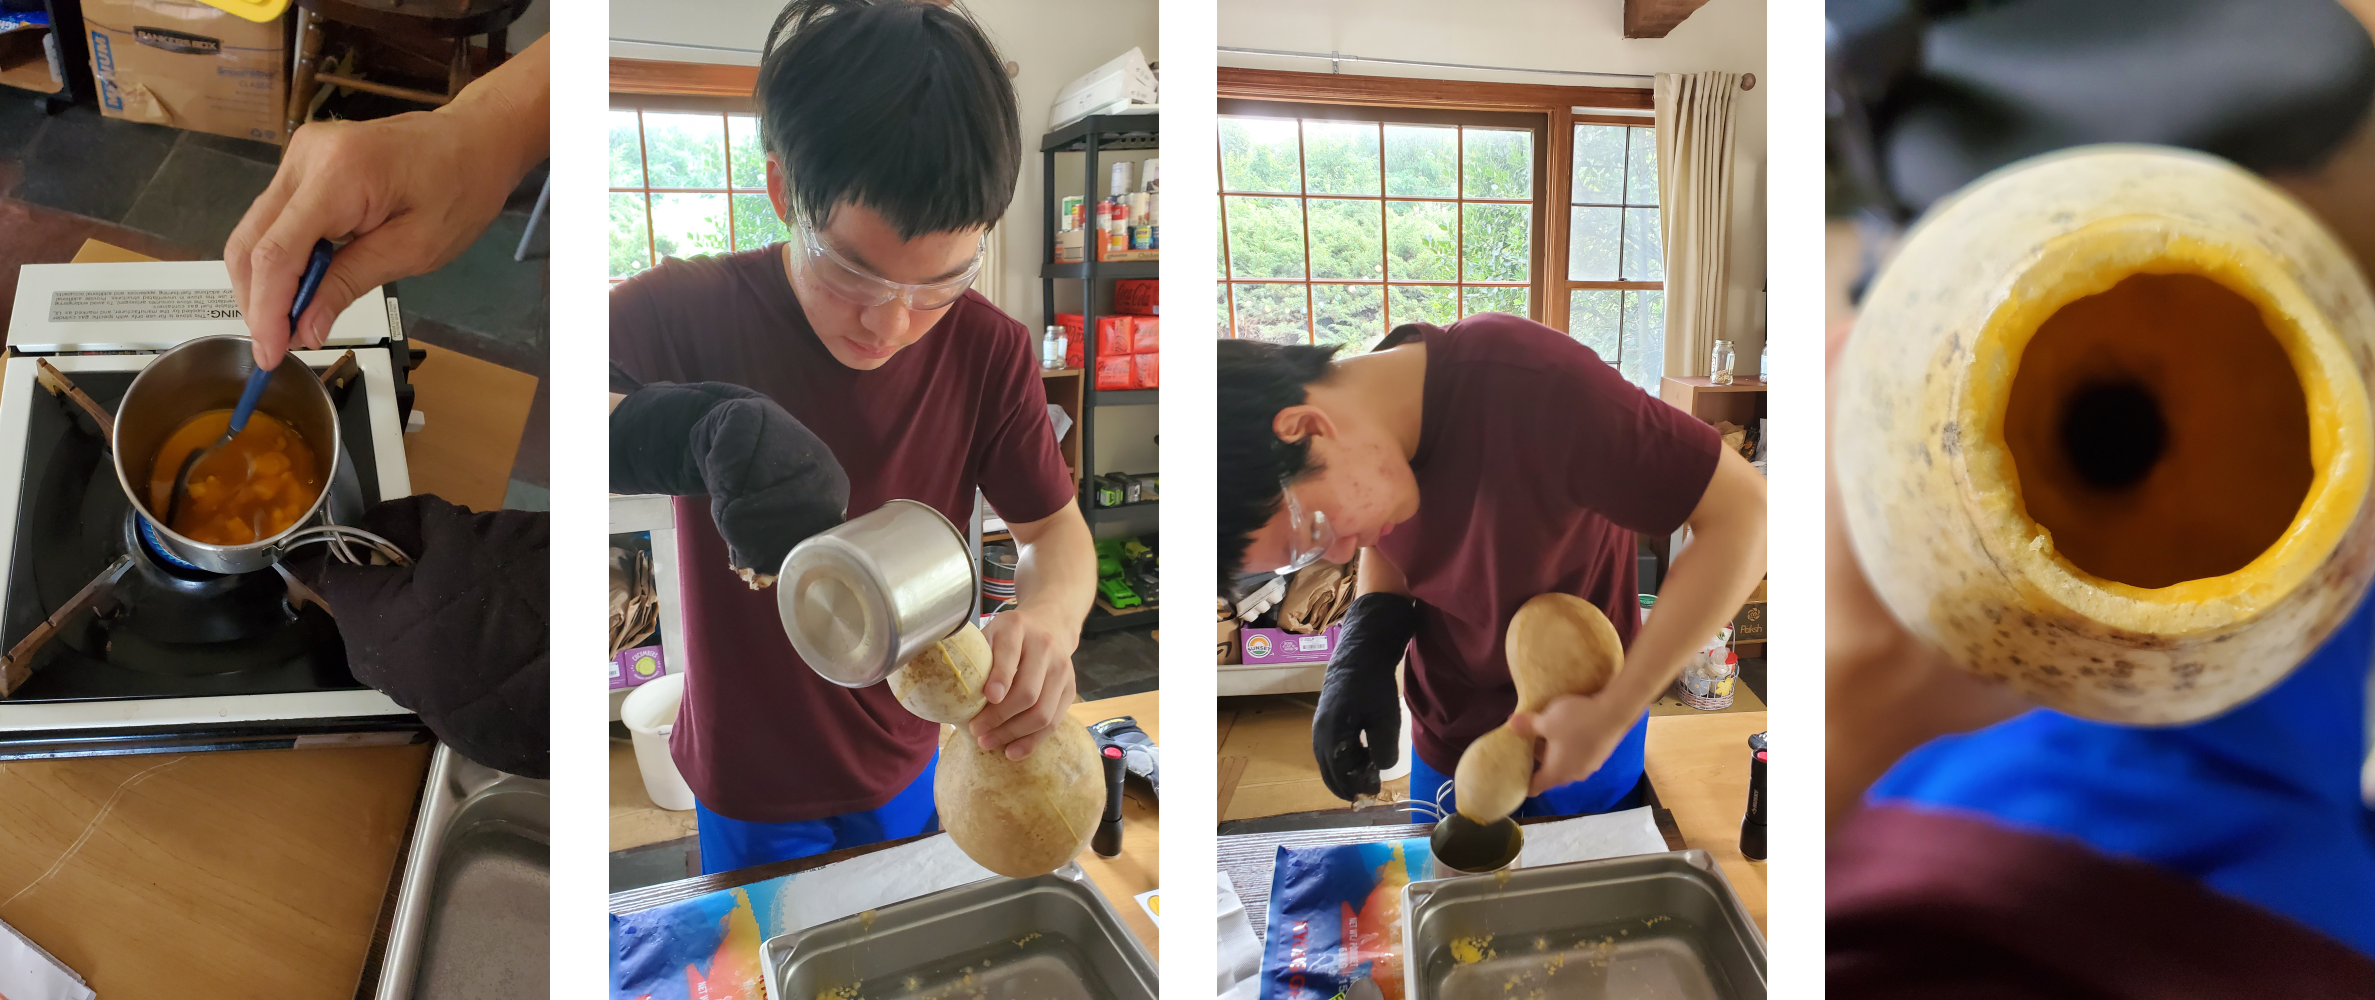 The process of sealing the gourd